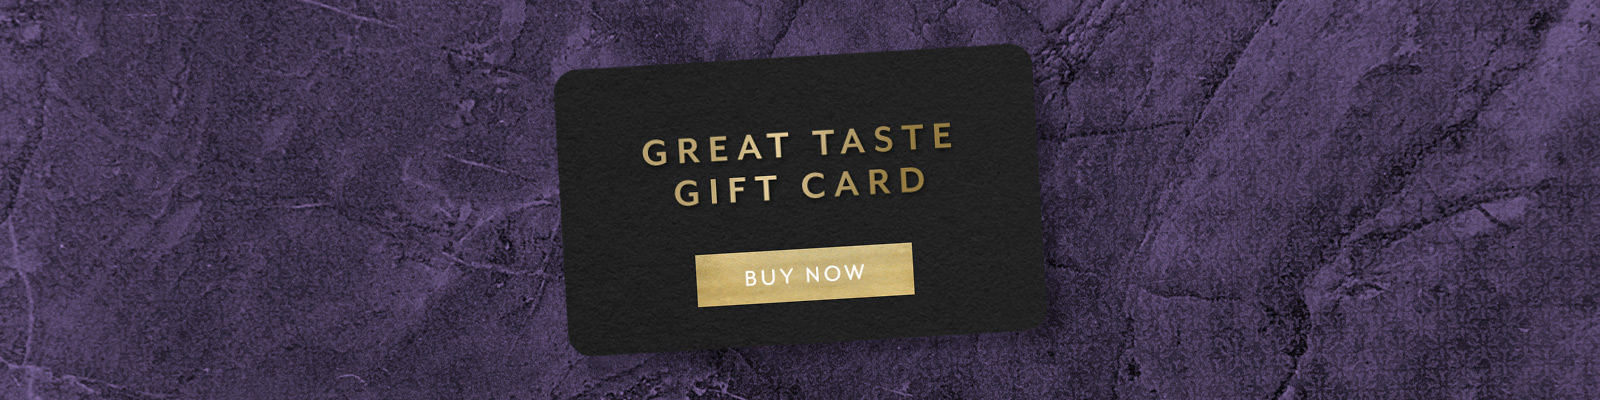 The Fox & Hounds Gift Card